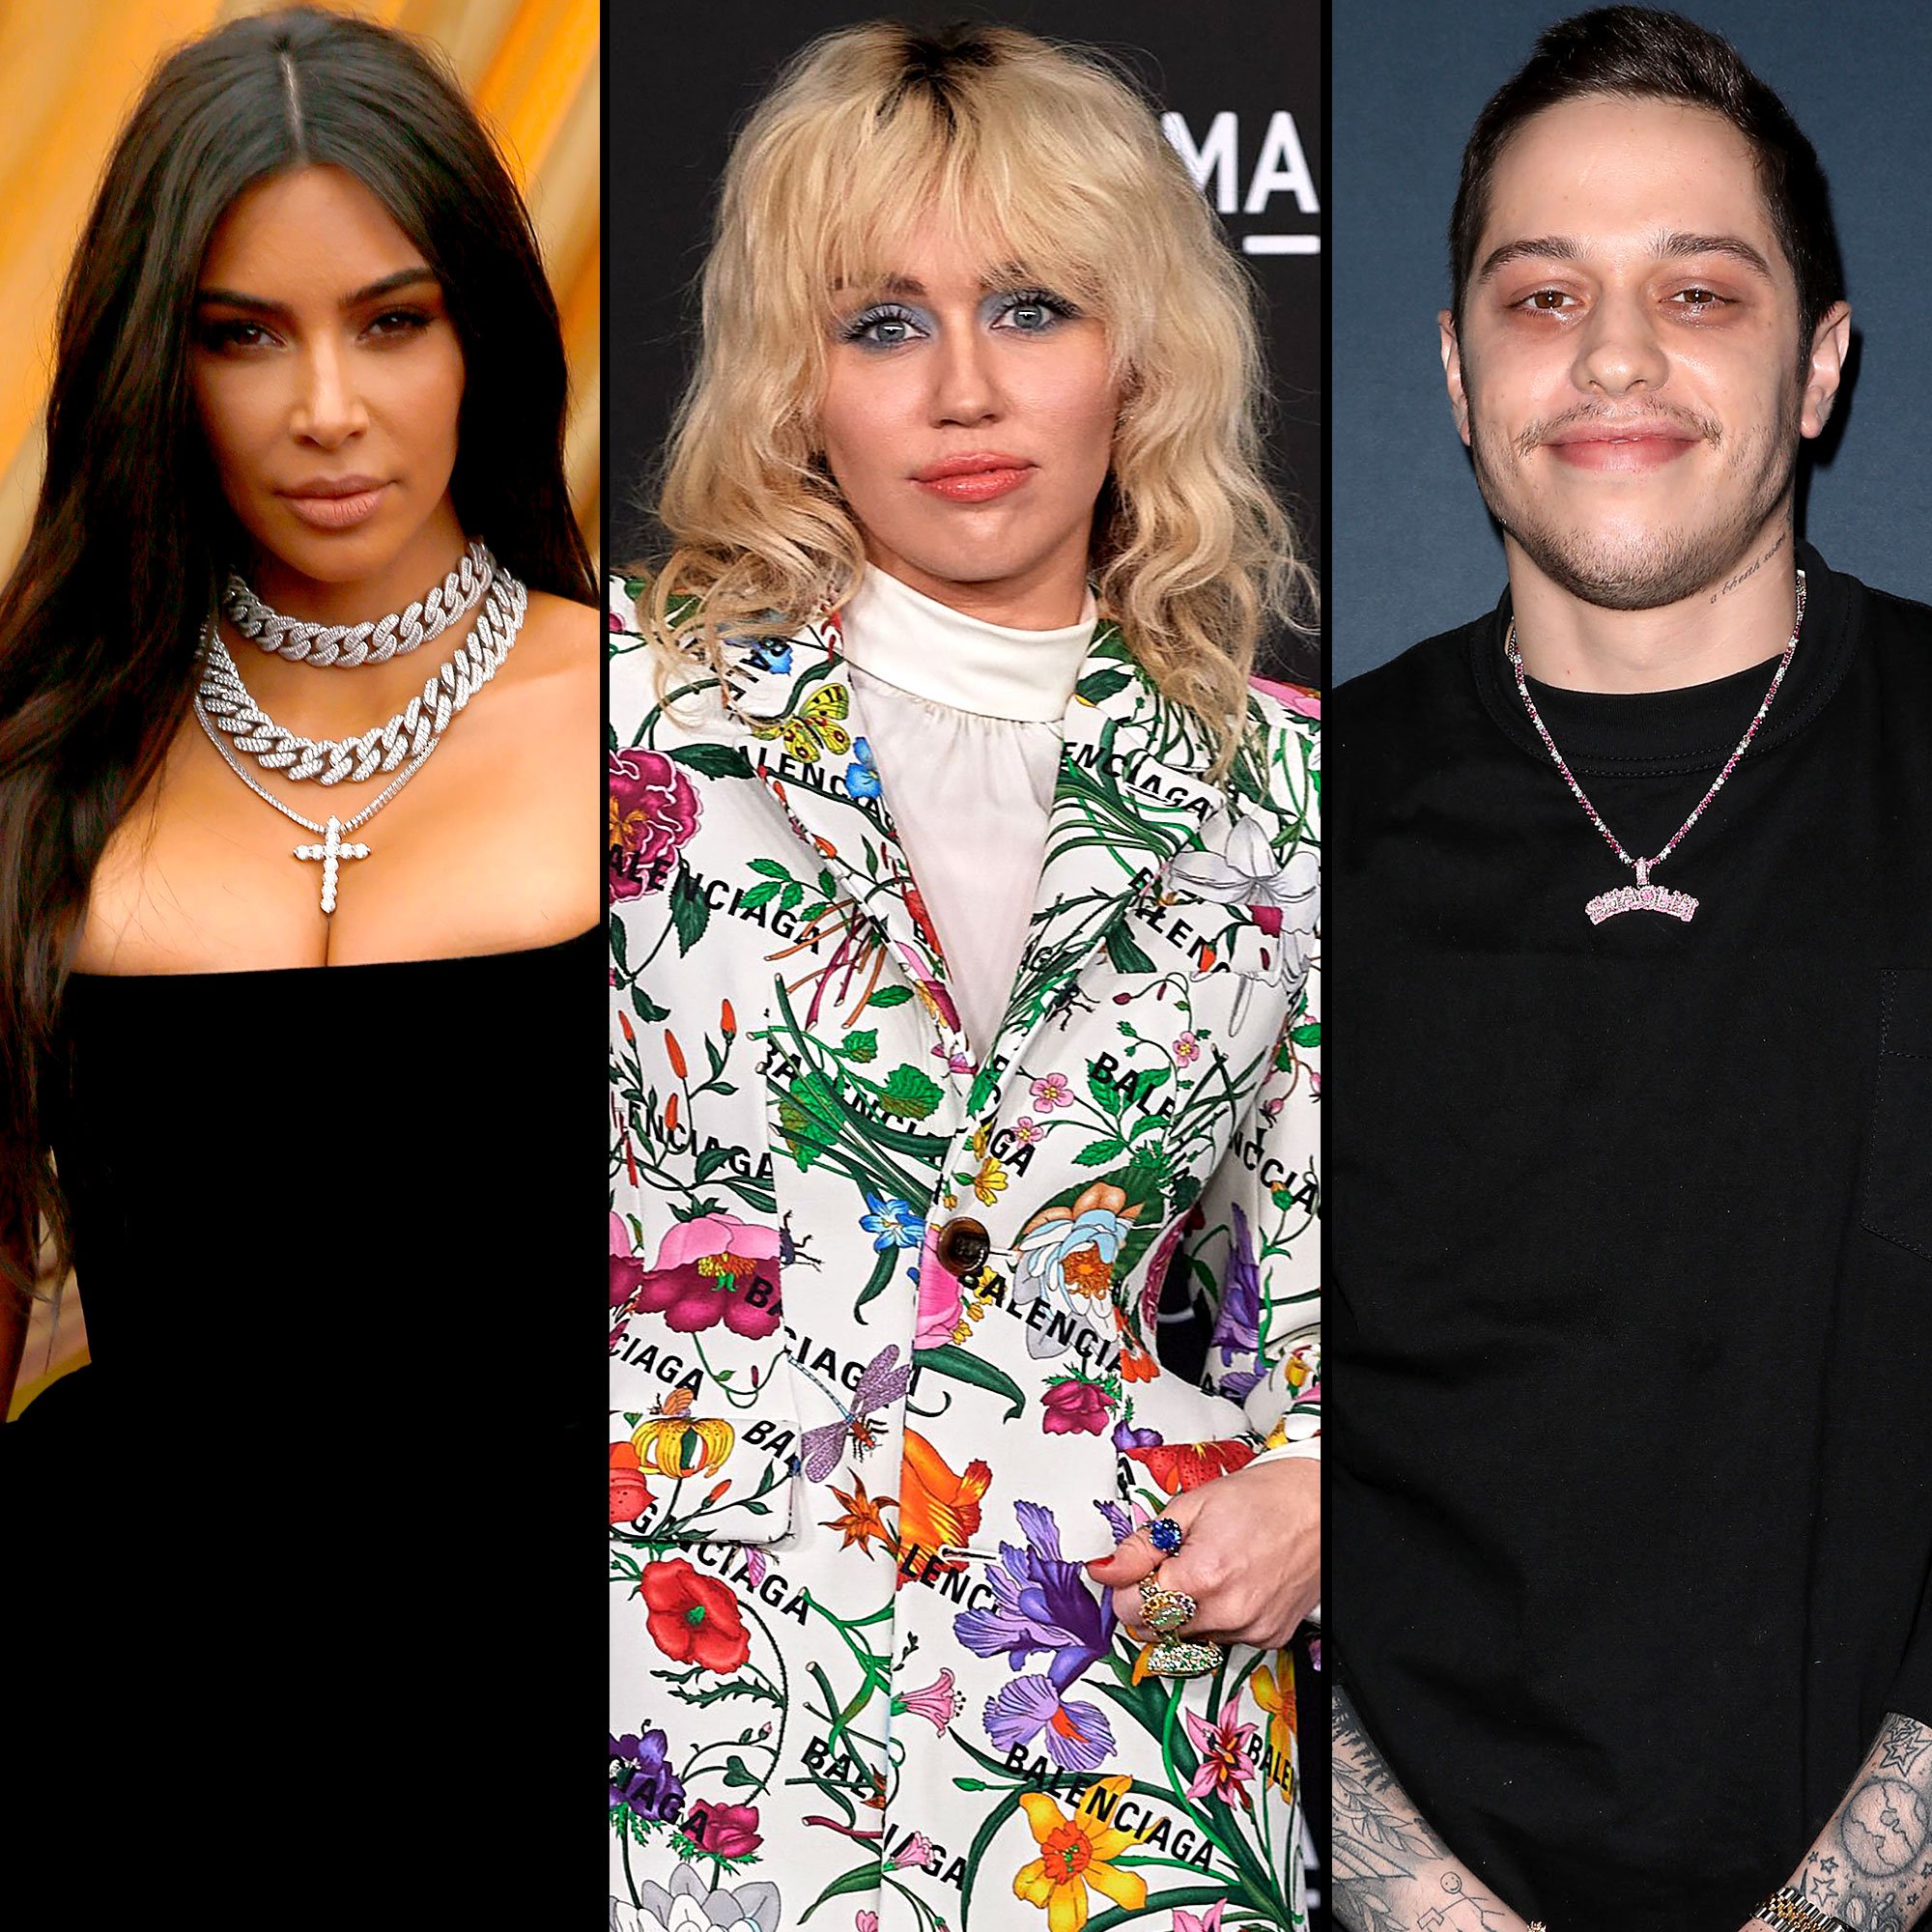 Kim Kardashian stops following Miley Cyrus after the New York special with Pete Davidson